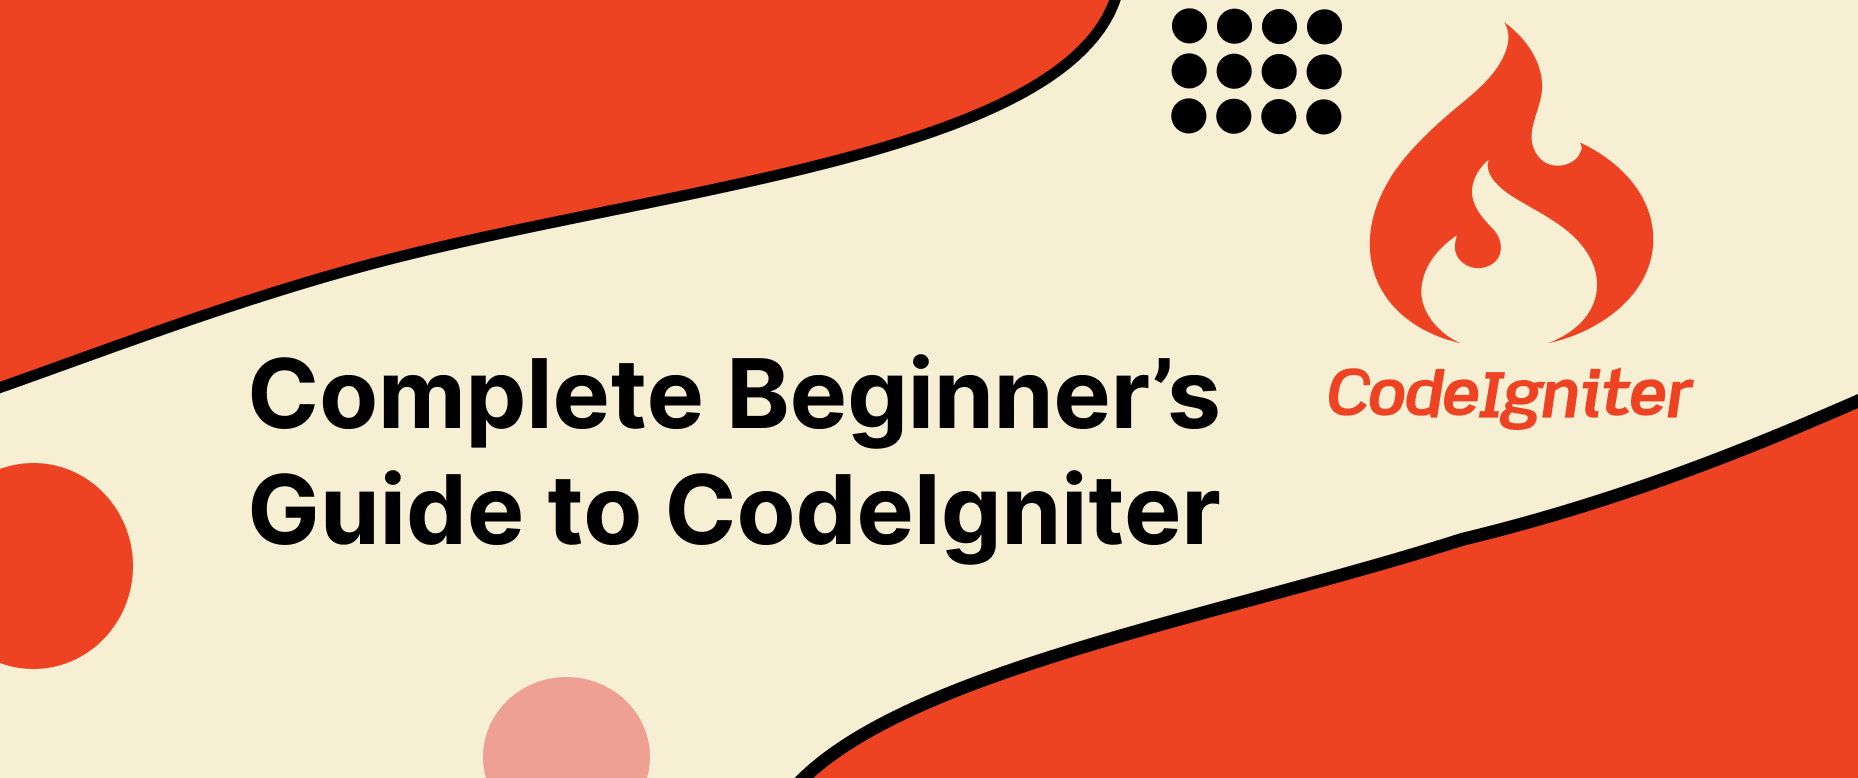 A Complete Beginner’s Guide to CodeIgniter pyzen technologies